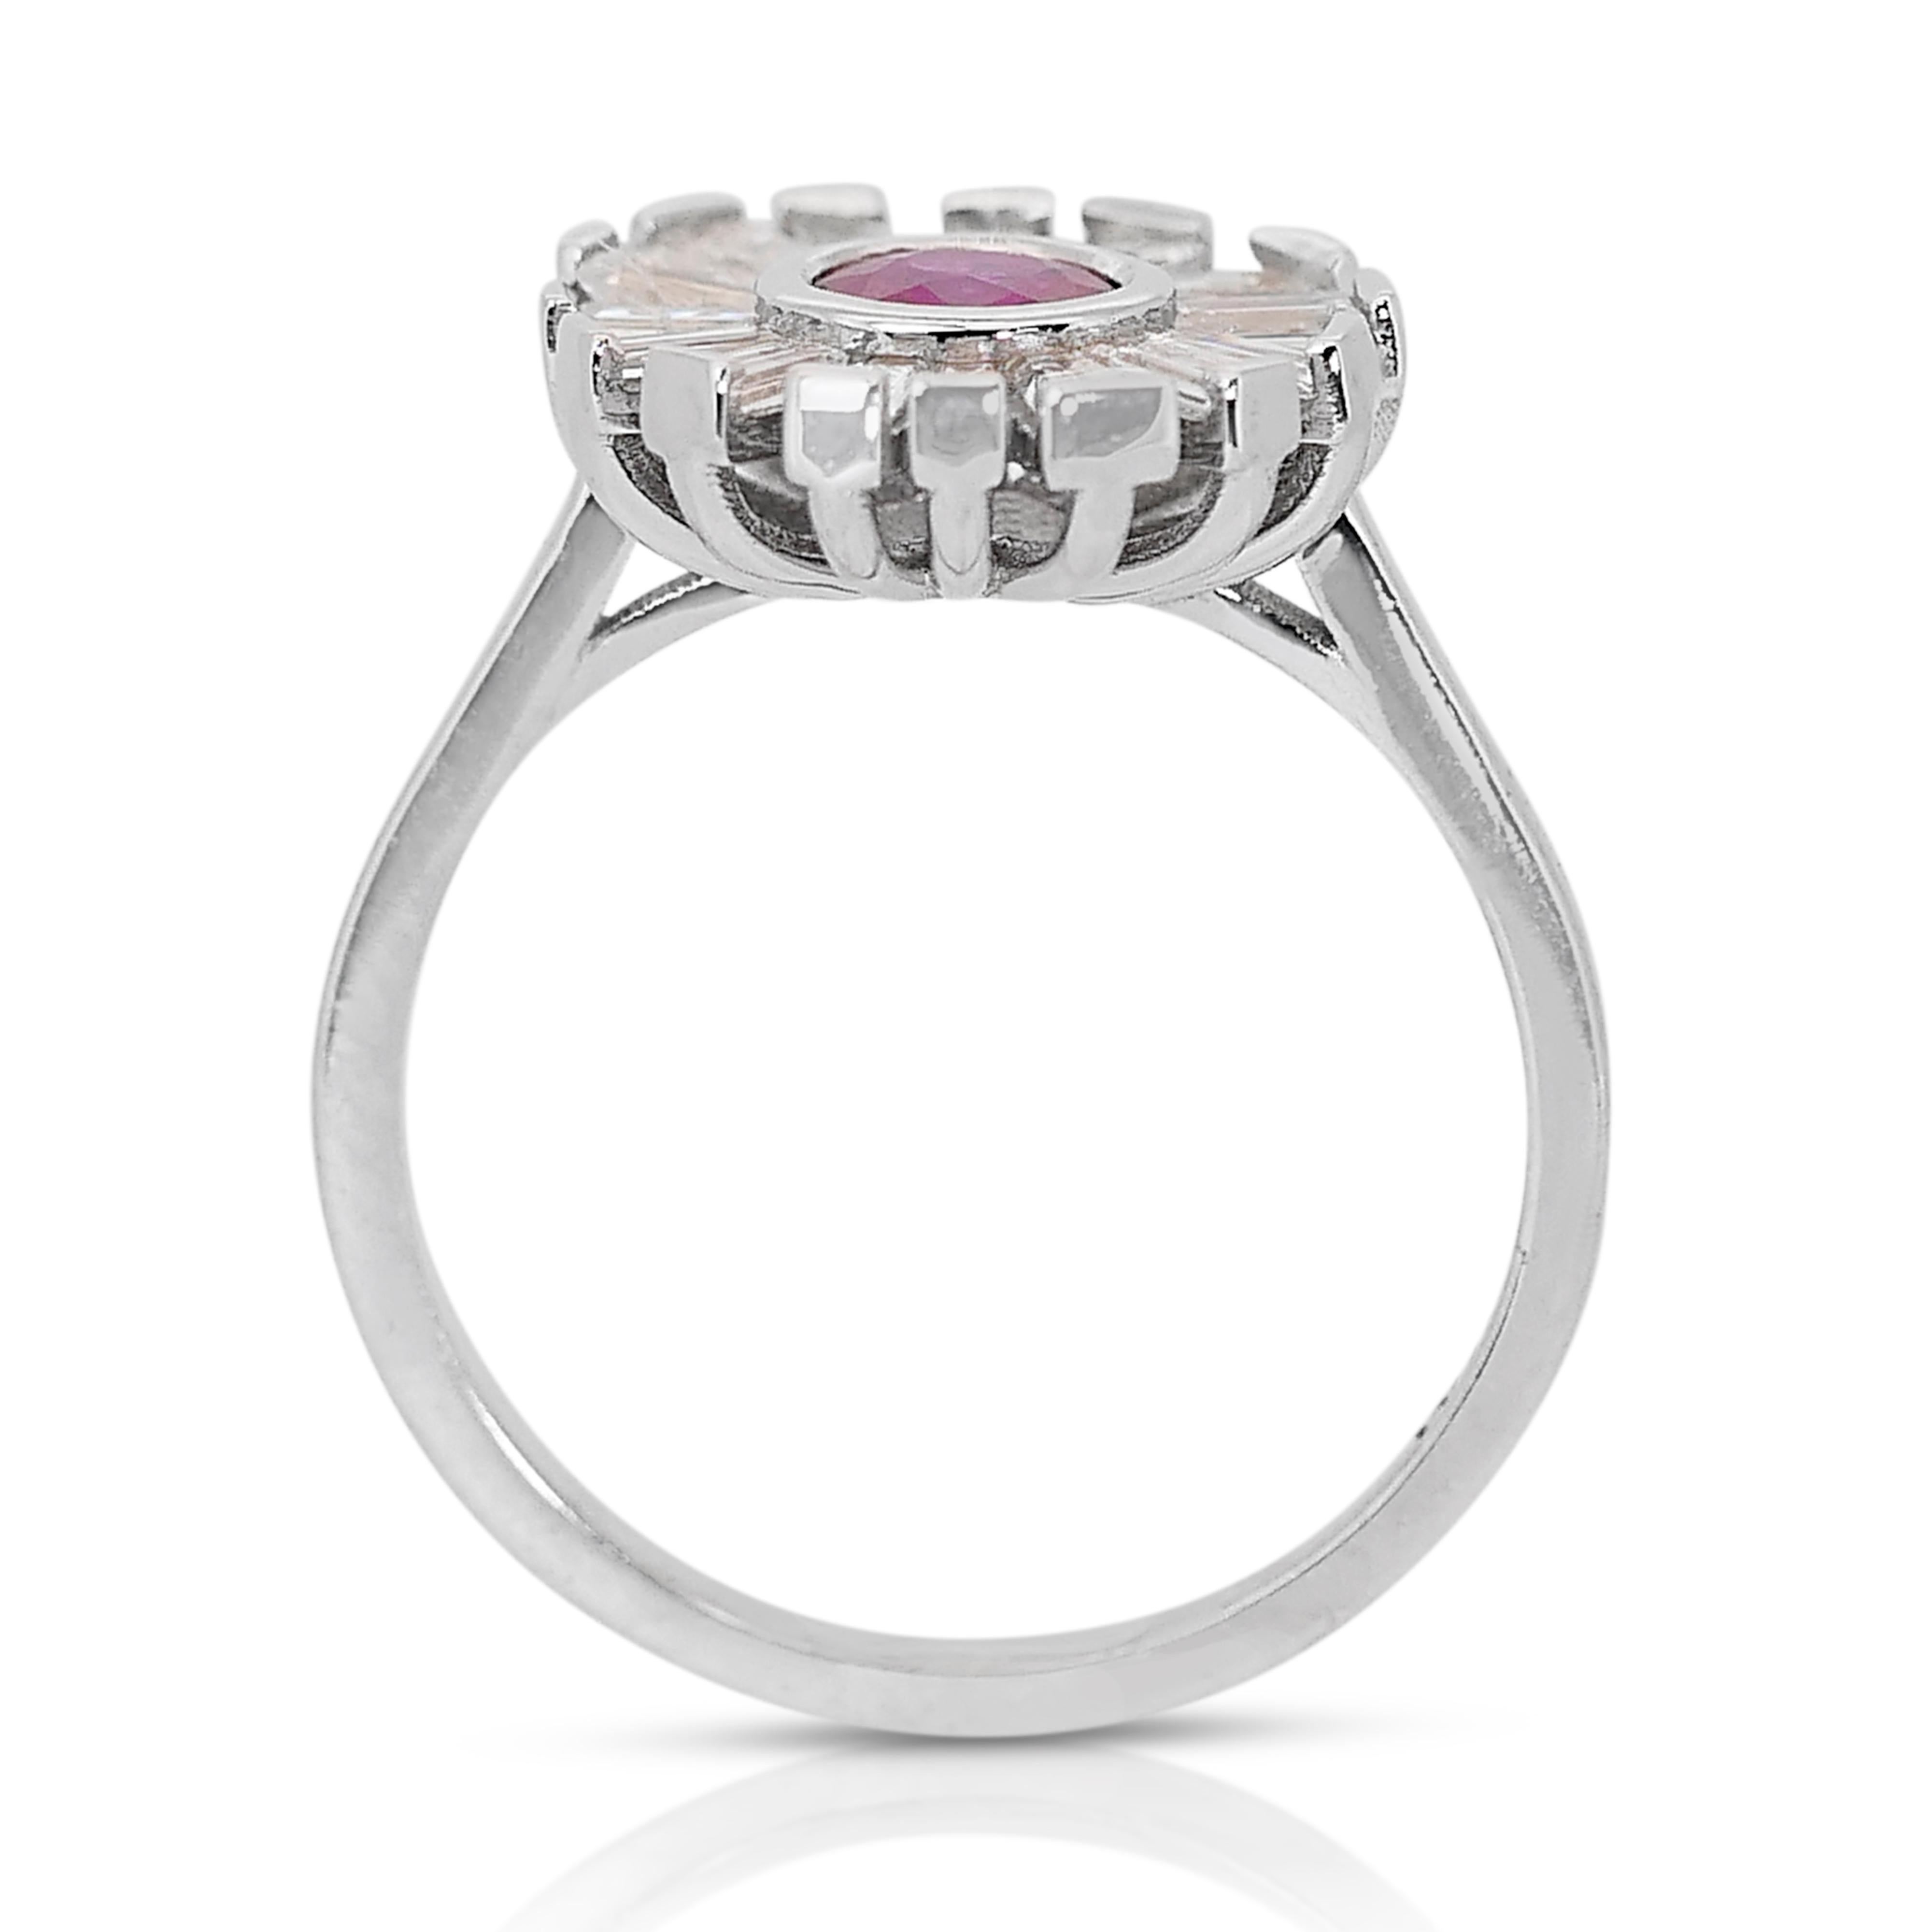 Stunning 1.20ct Ruby and Diamonds Halo Ring in 18k White Gold - IGI Certified For Sale 1